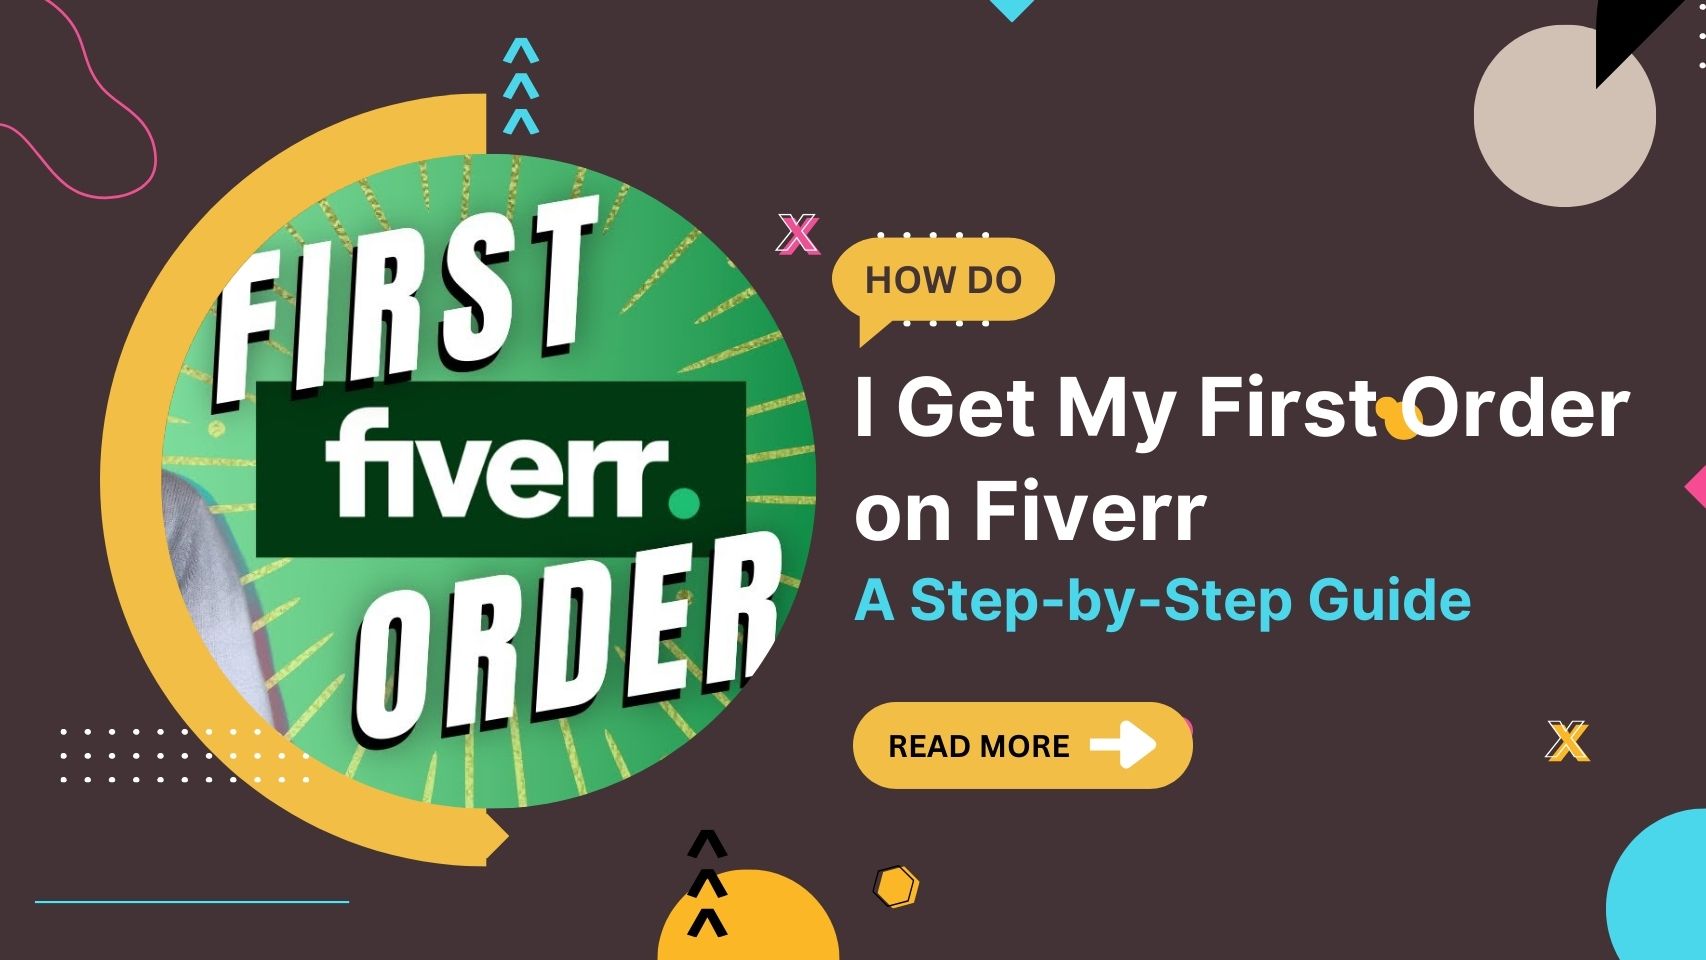 How Do I Get My First Order on Fiverr? A Step-by-Step Guide